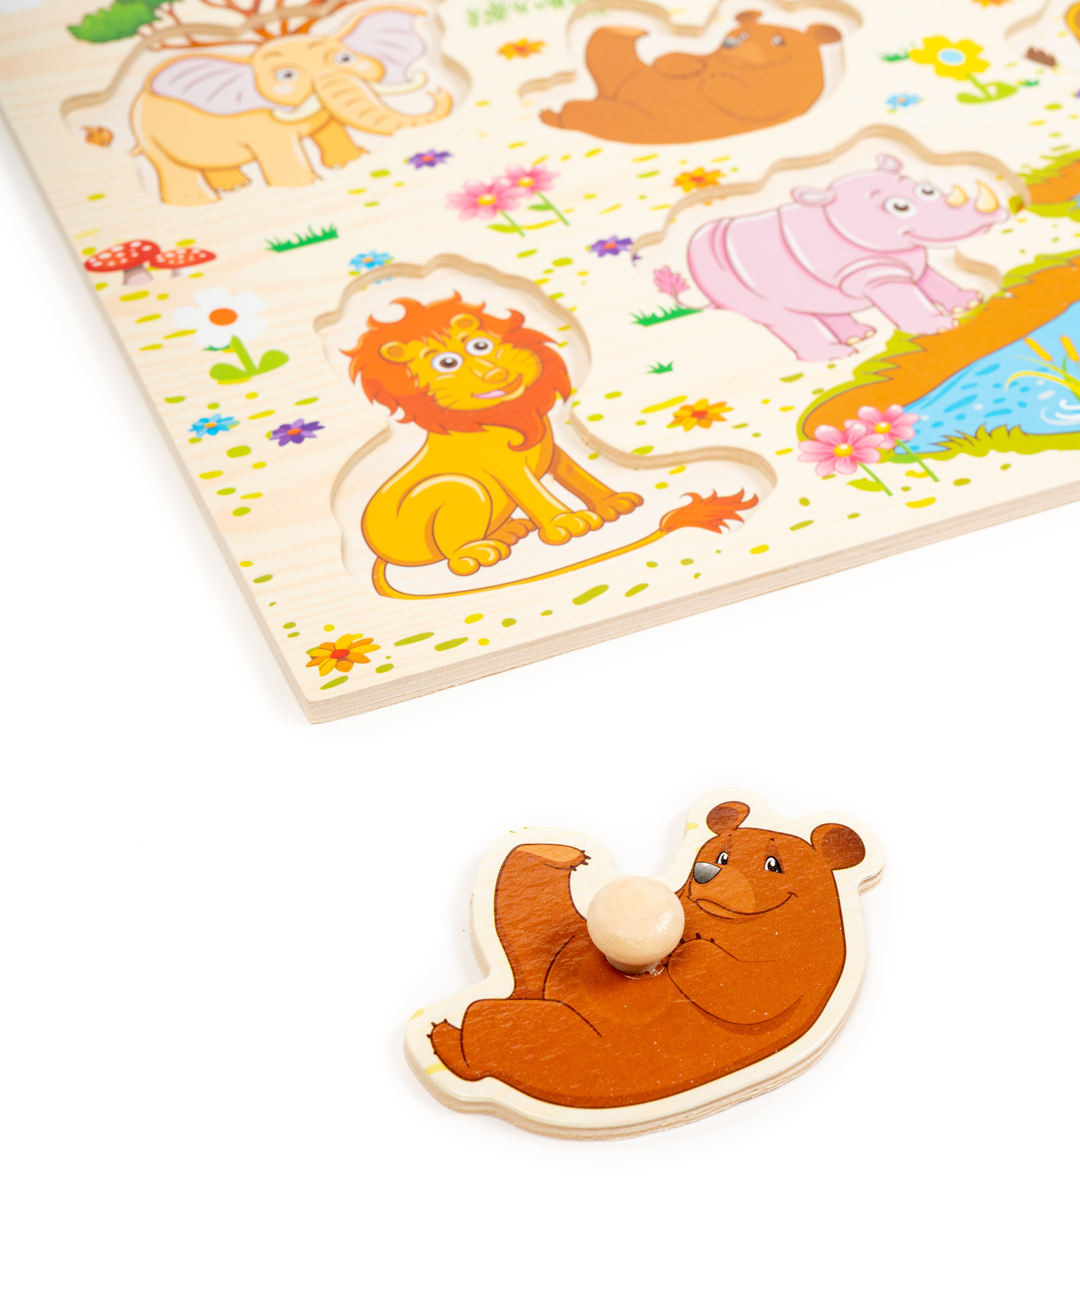 4 Wildlife Early Learning Wooden Peg Puzzles